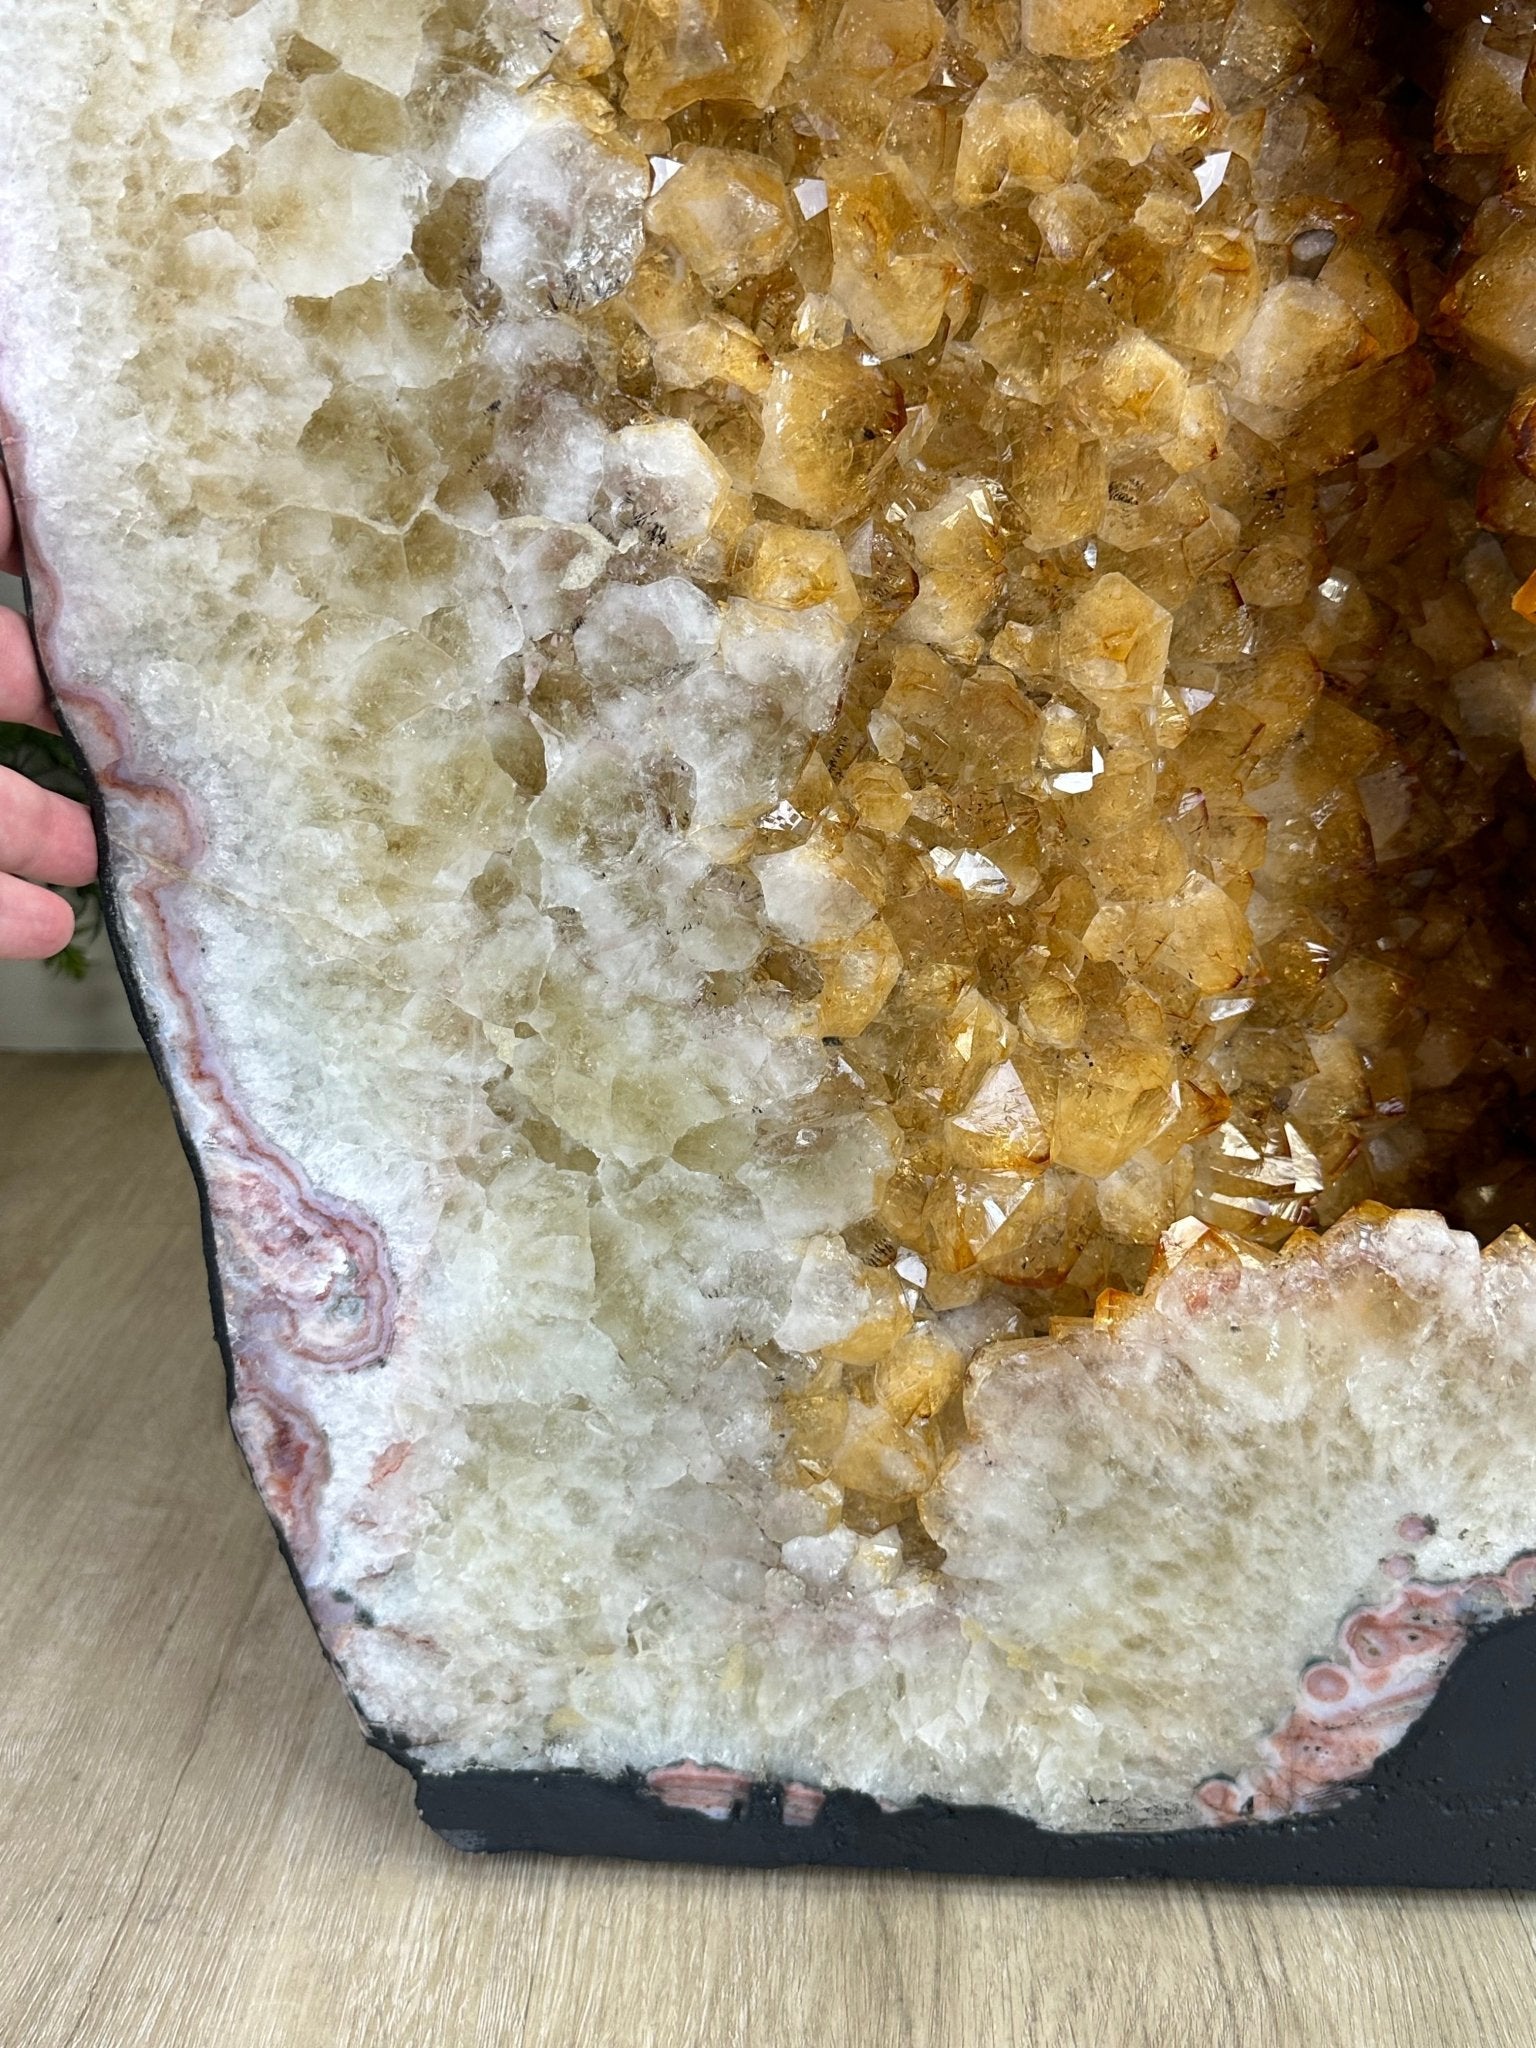 Large Extra Quality Citrine Cathedral, 344 lbs & 65.7" Tall #5603-0312 - Brazil GemsBrazil GemsLarge Extra Quality Citrine Cathedral, 344 lbs & 65.7" Tall #5603-0312Cathedrals5603-0312